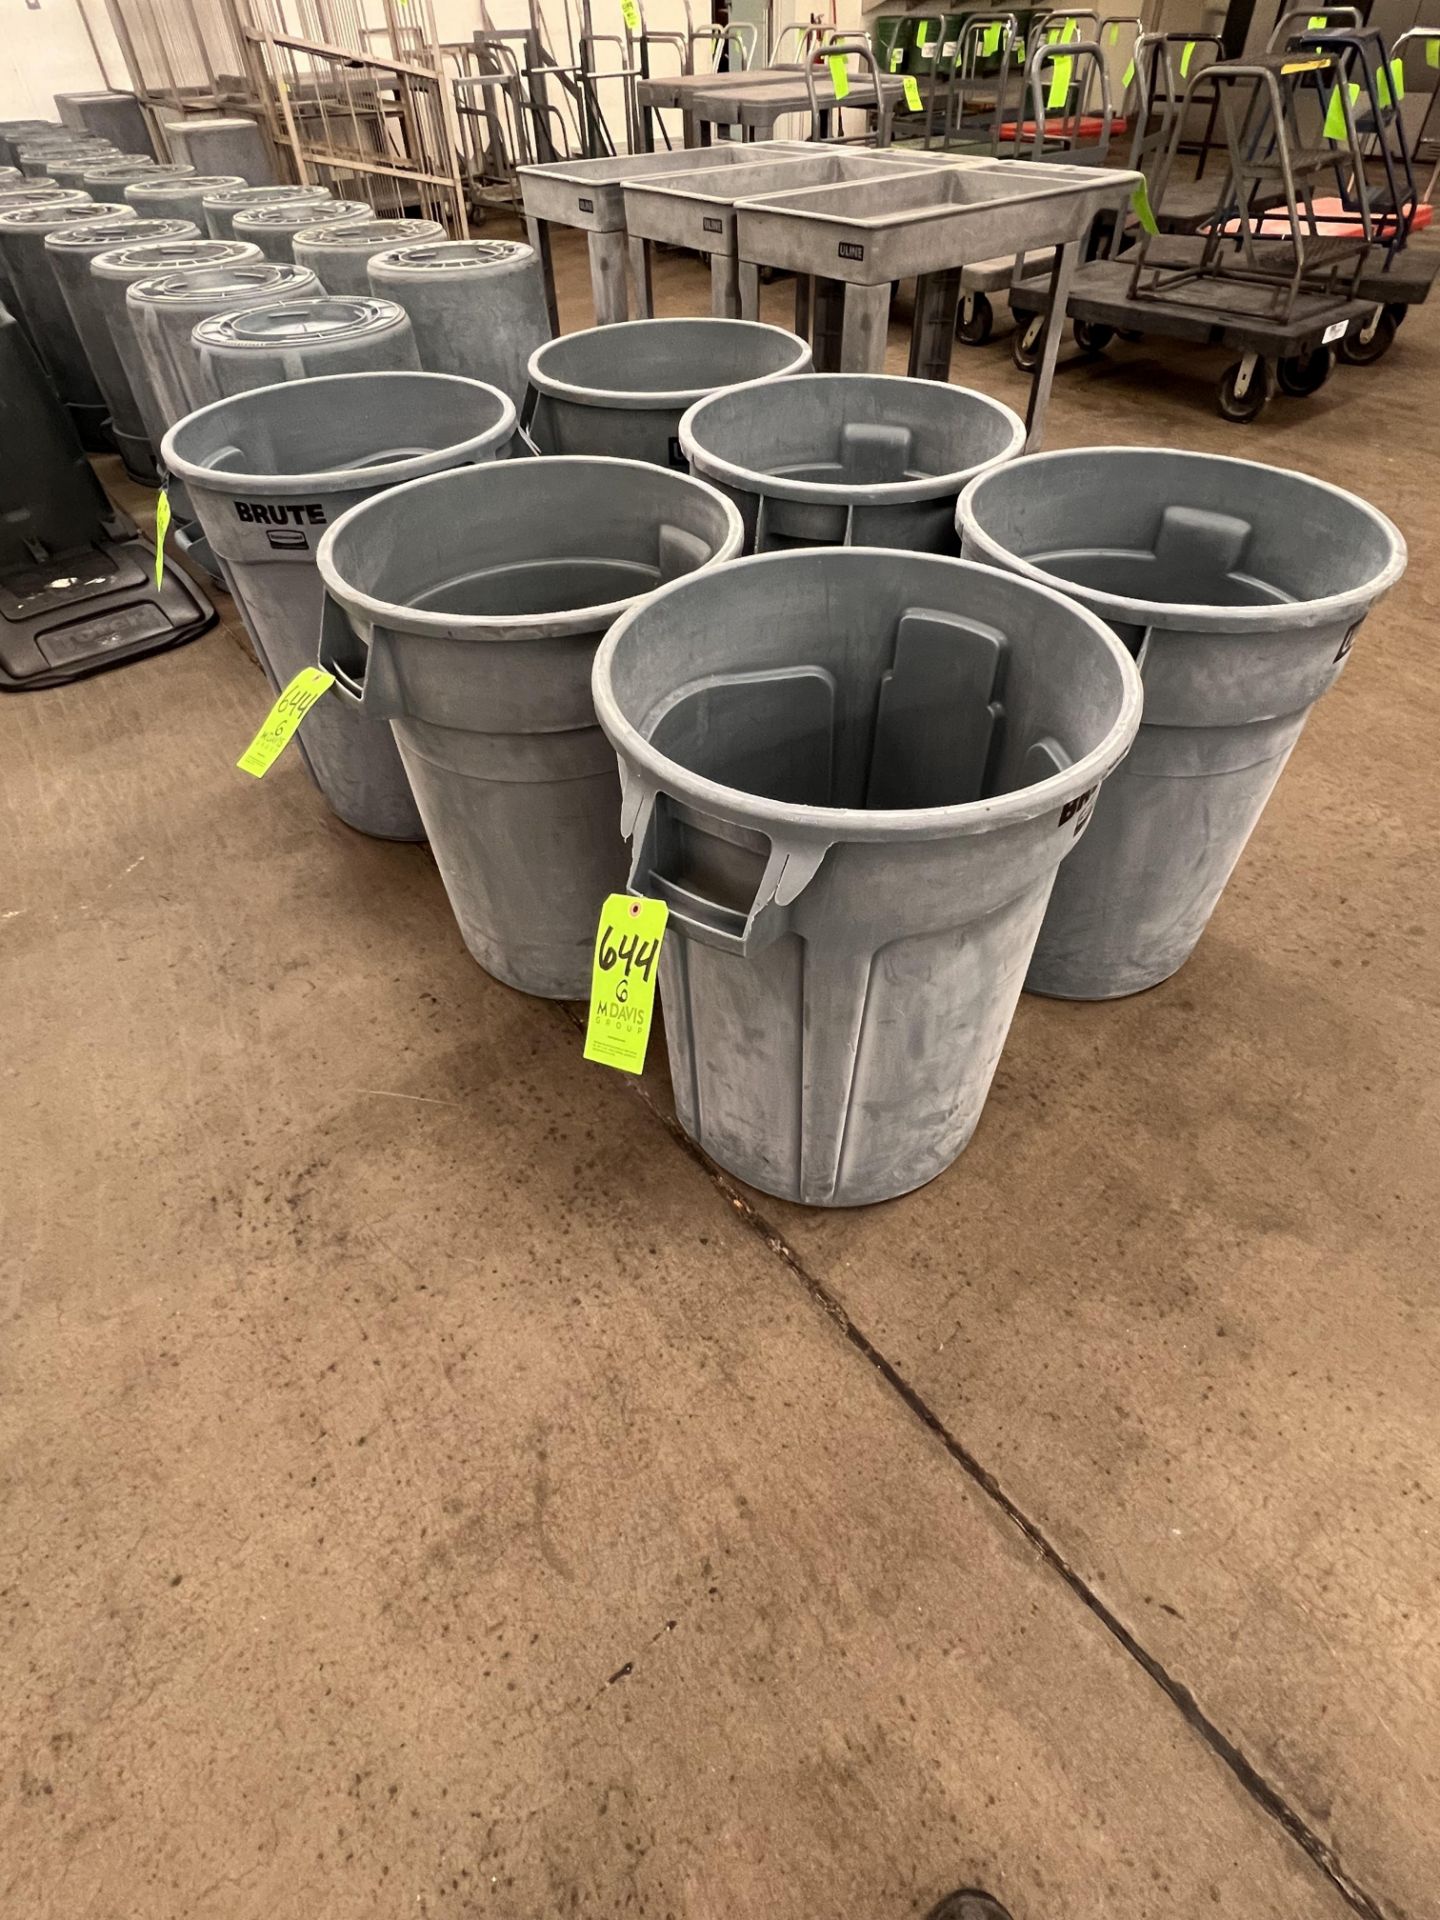 (6) RUBBERMAID BRUTE TRASH CANS